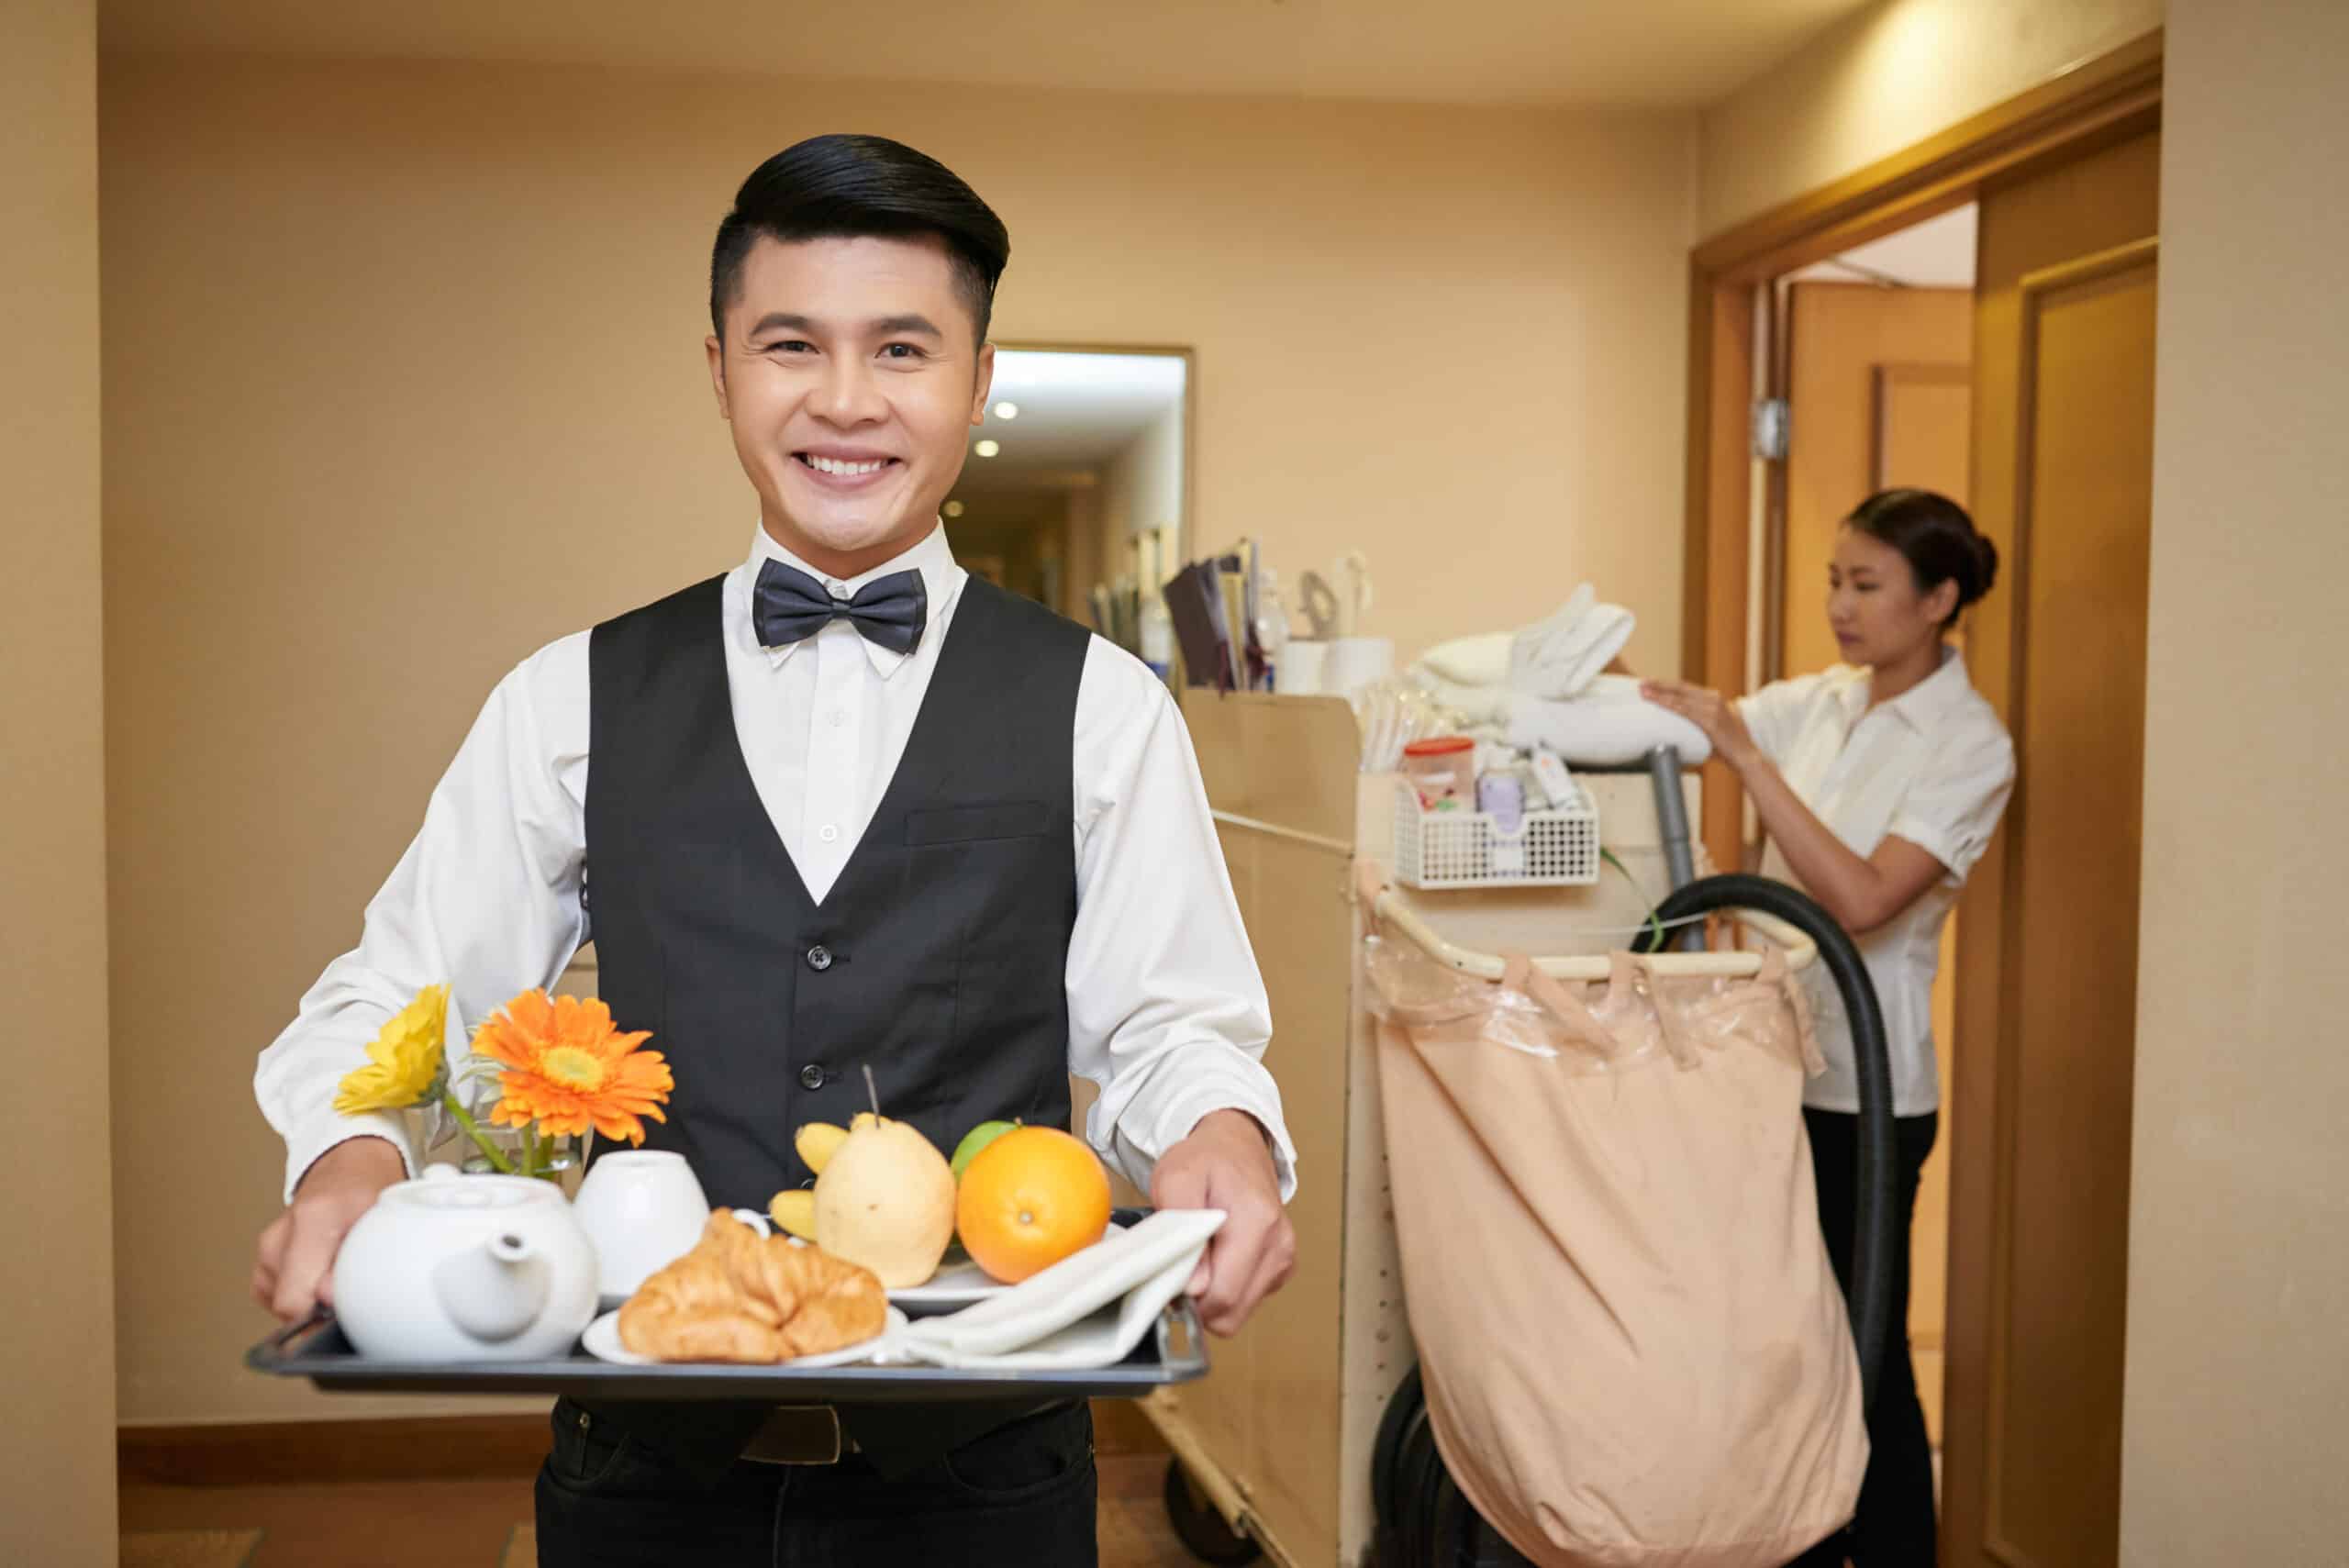 Portrait of smiling Vietnamese waiter and chambermaid in the background